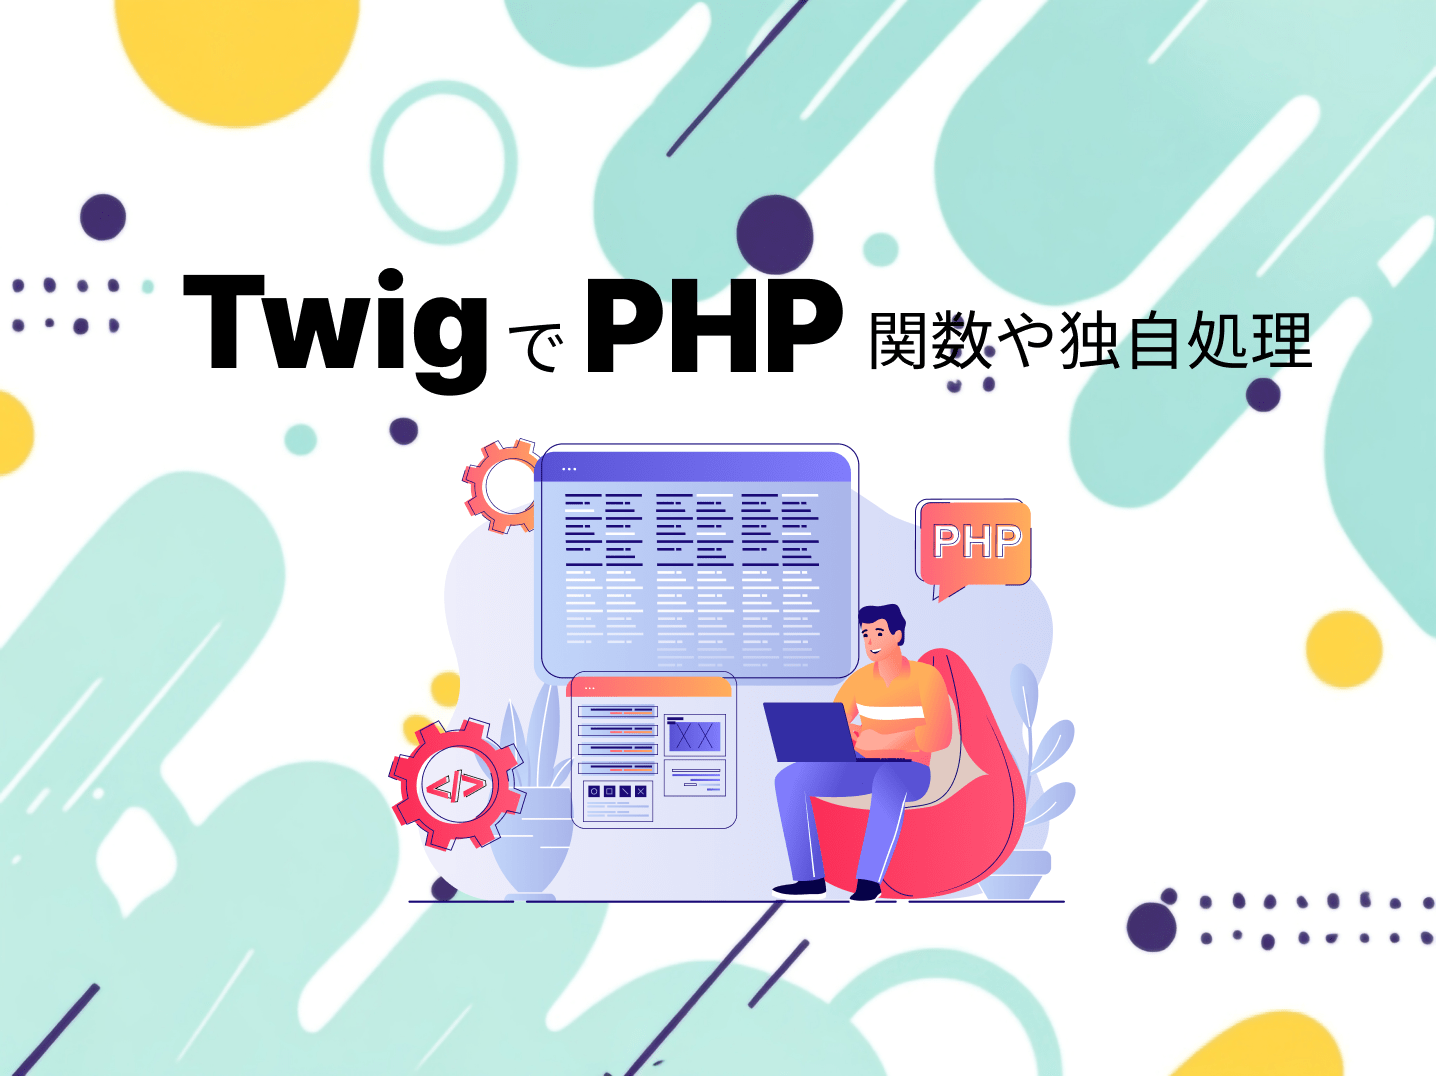 TwigでPHP関数や独自処理を実行する。